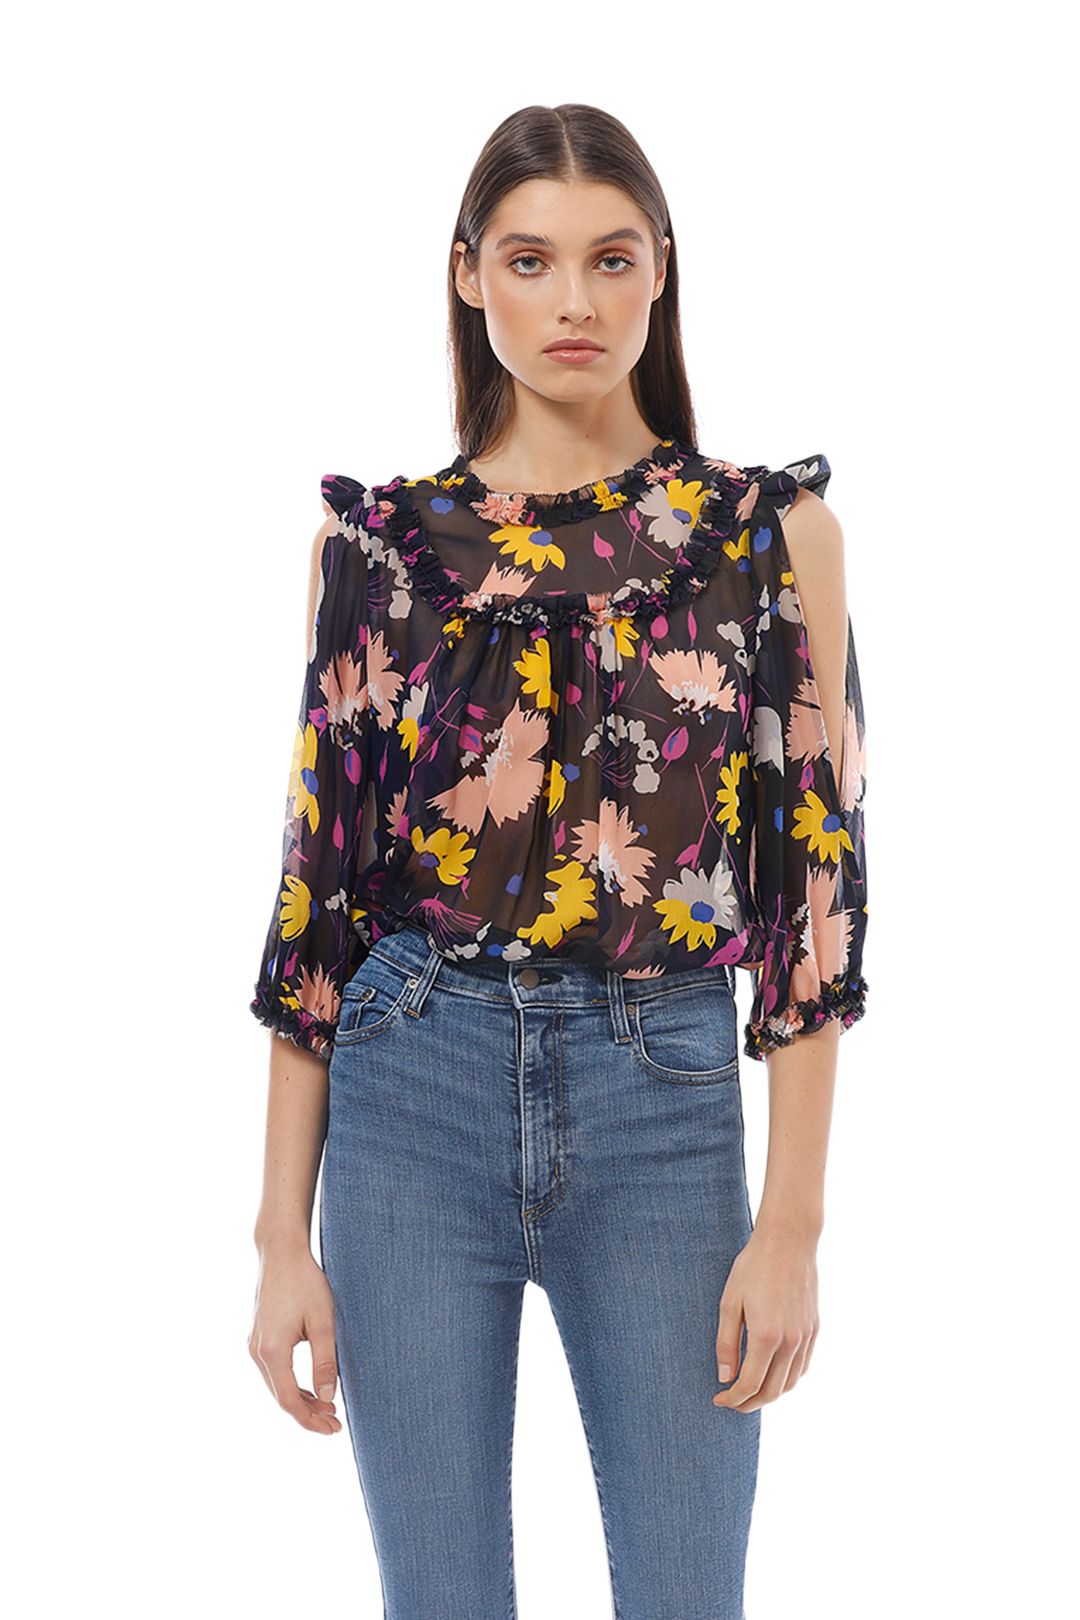 Alice McCall - Diamond Eyes Blouse - Black Floral - Close Up